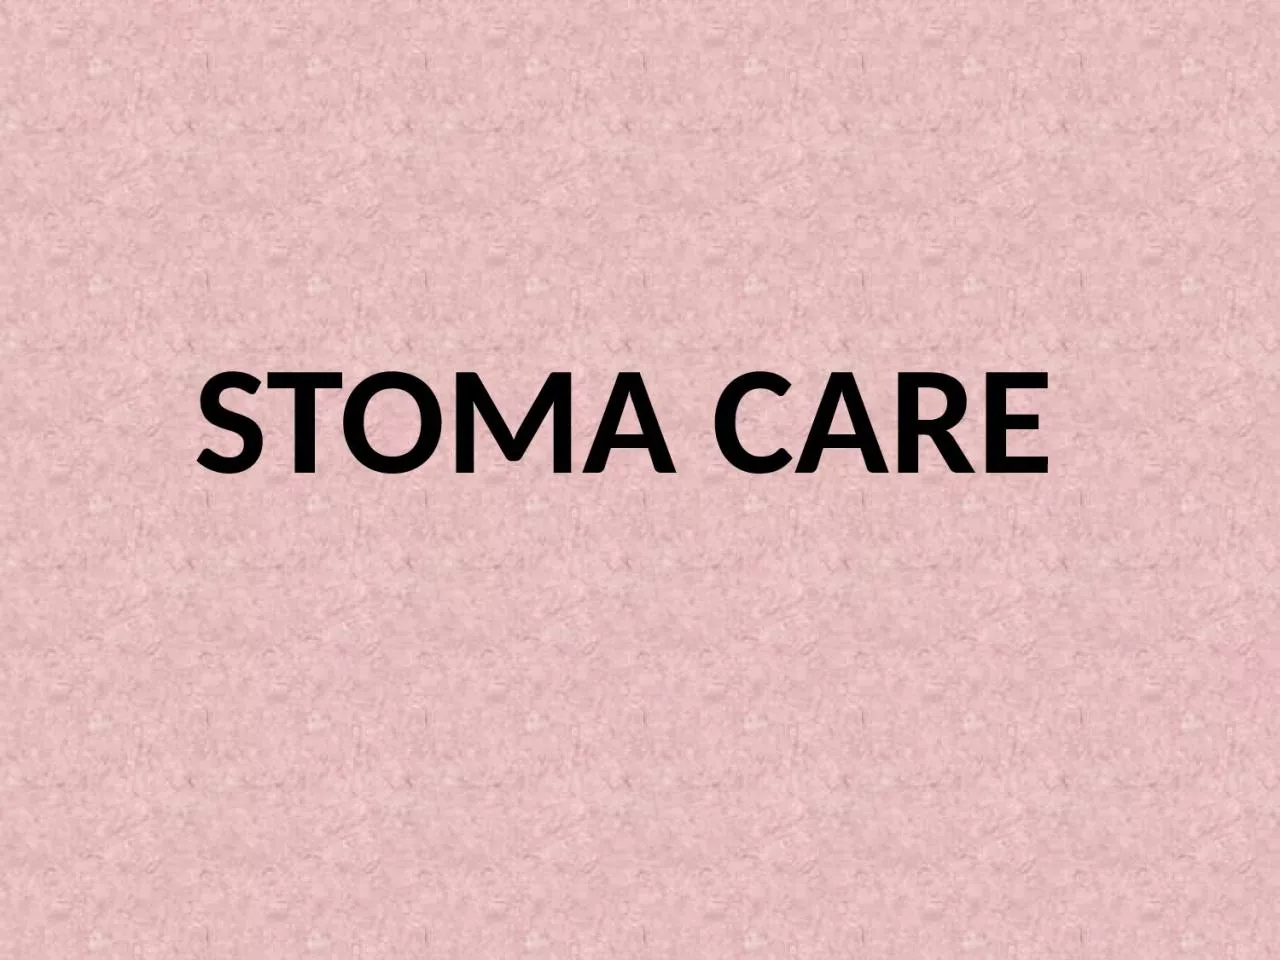 STOMA CARE DEFINITION  A stoma is an opening that is created to allow stool or urine to